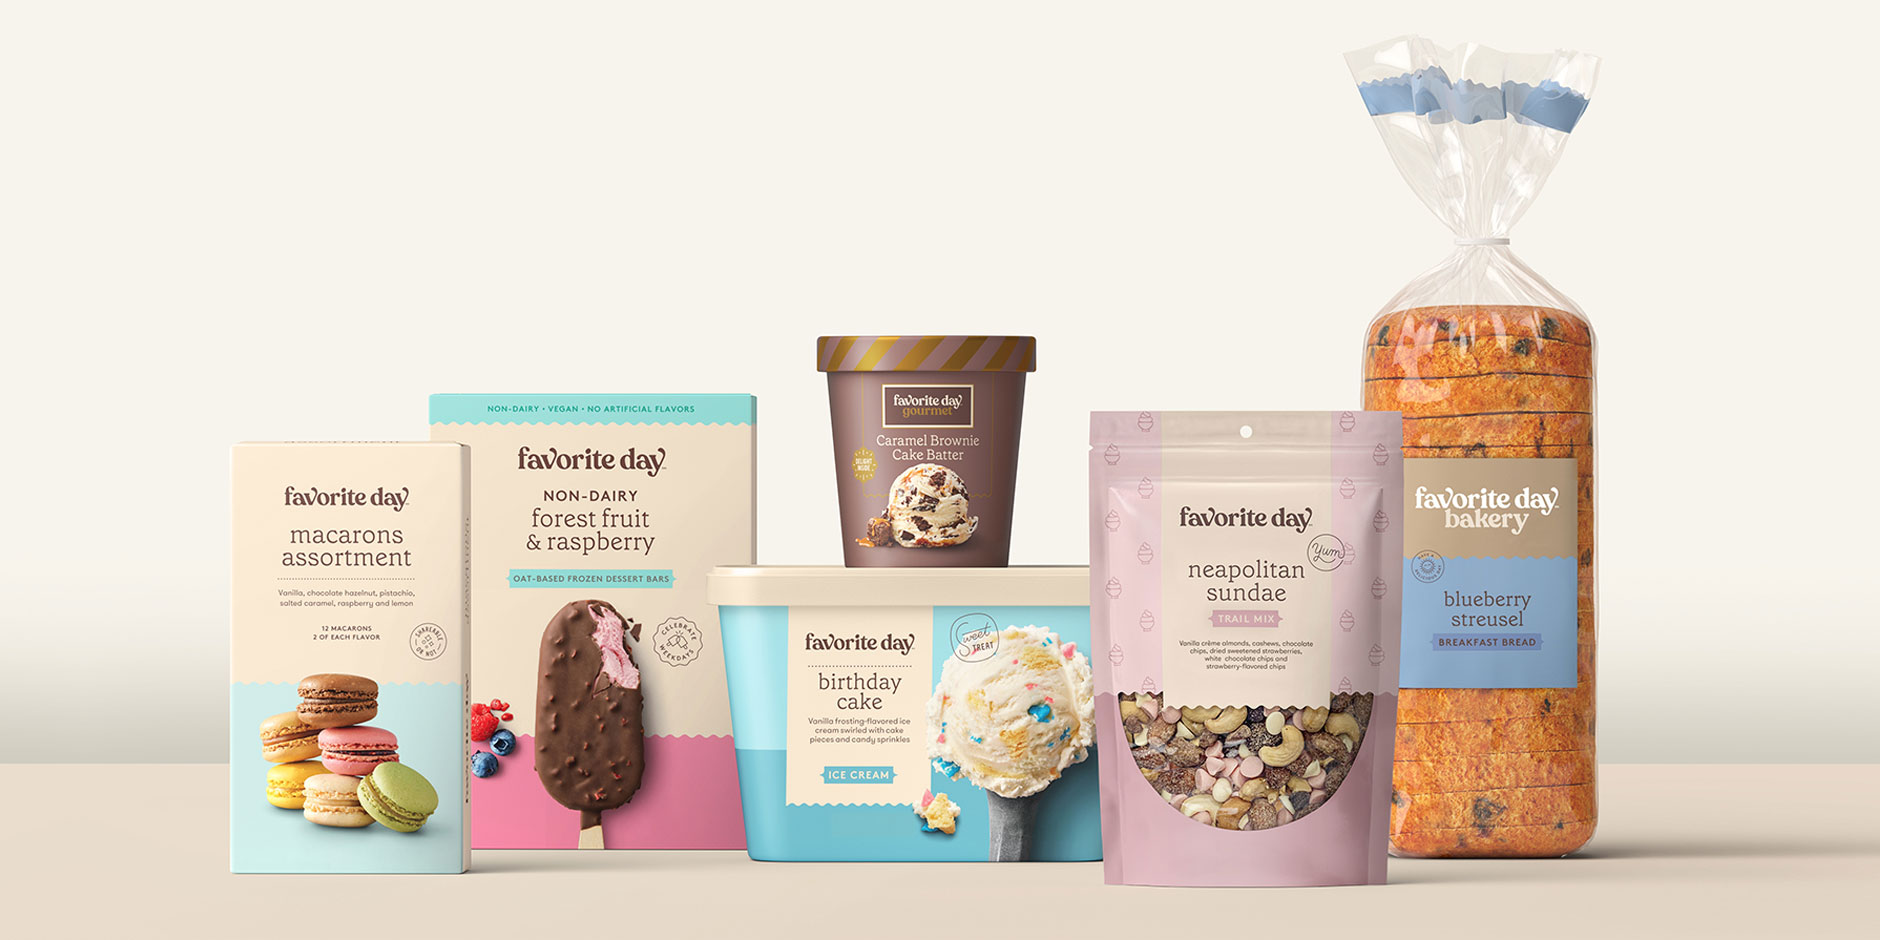 "A collage shows six different Favorite Day products, from macarons and premium ice cream to trail mix, in colorful pastel packages"